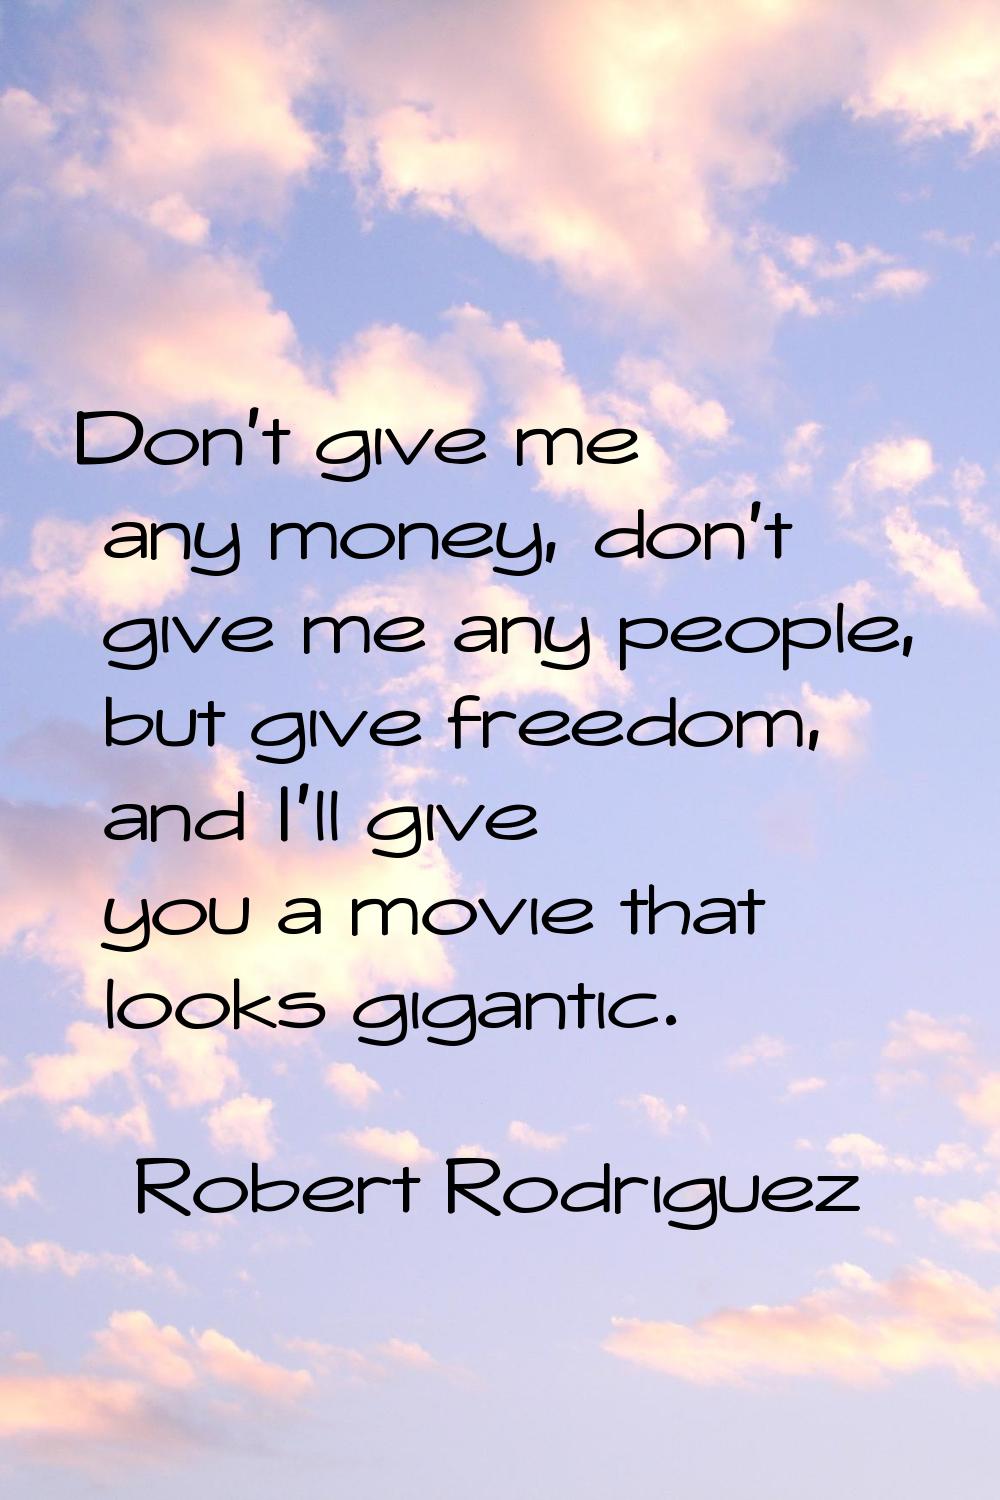 Don't give me any money, don't give me any people, but give freedom, and I'll give you a movie that